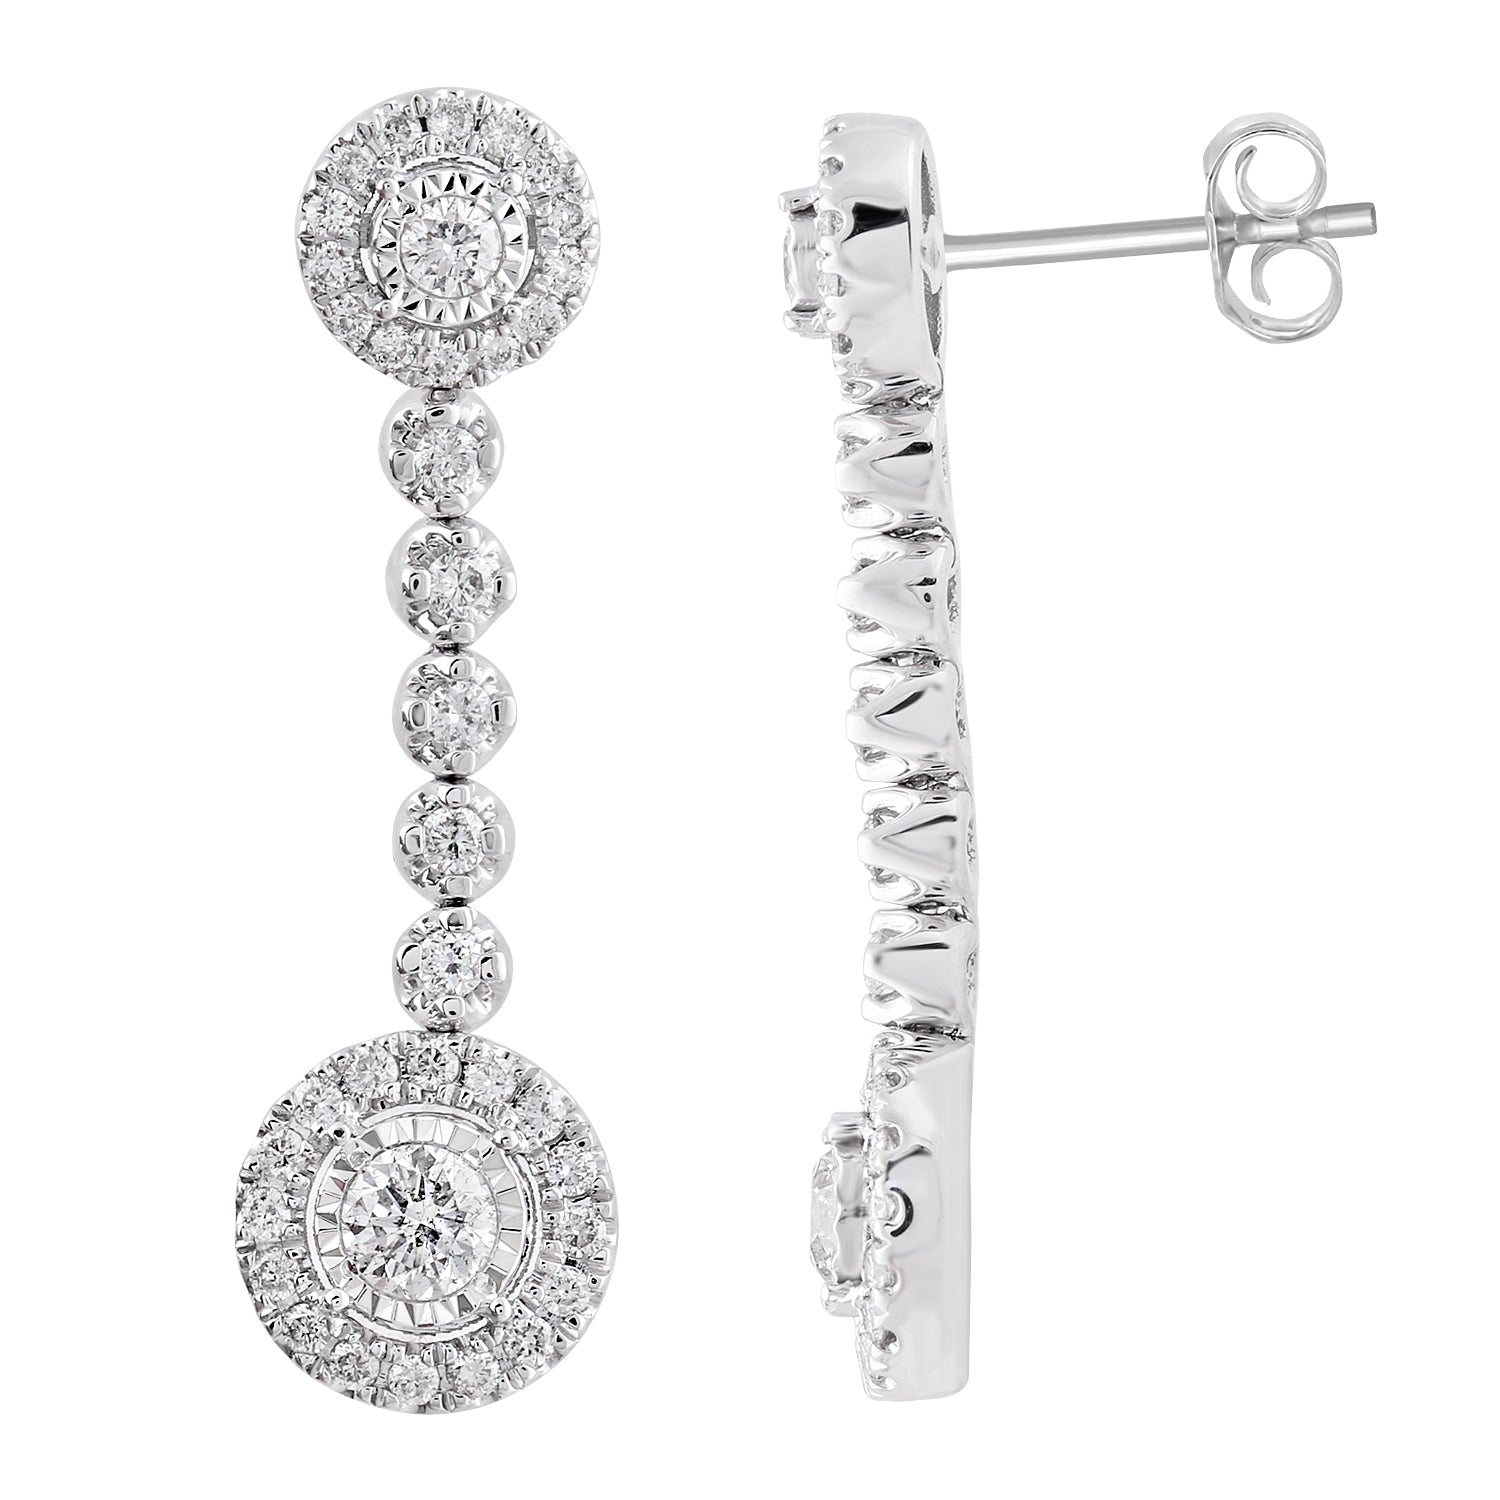 Fashion Drop Earrings Made In 14K White Gold